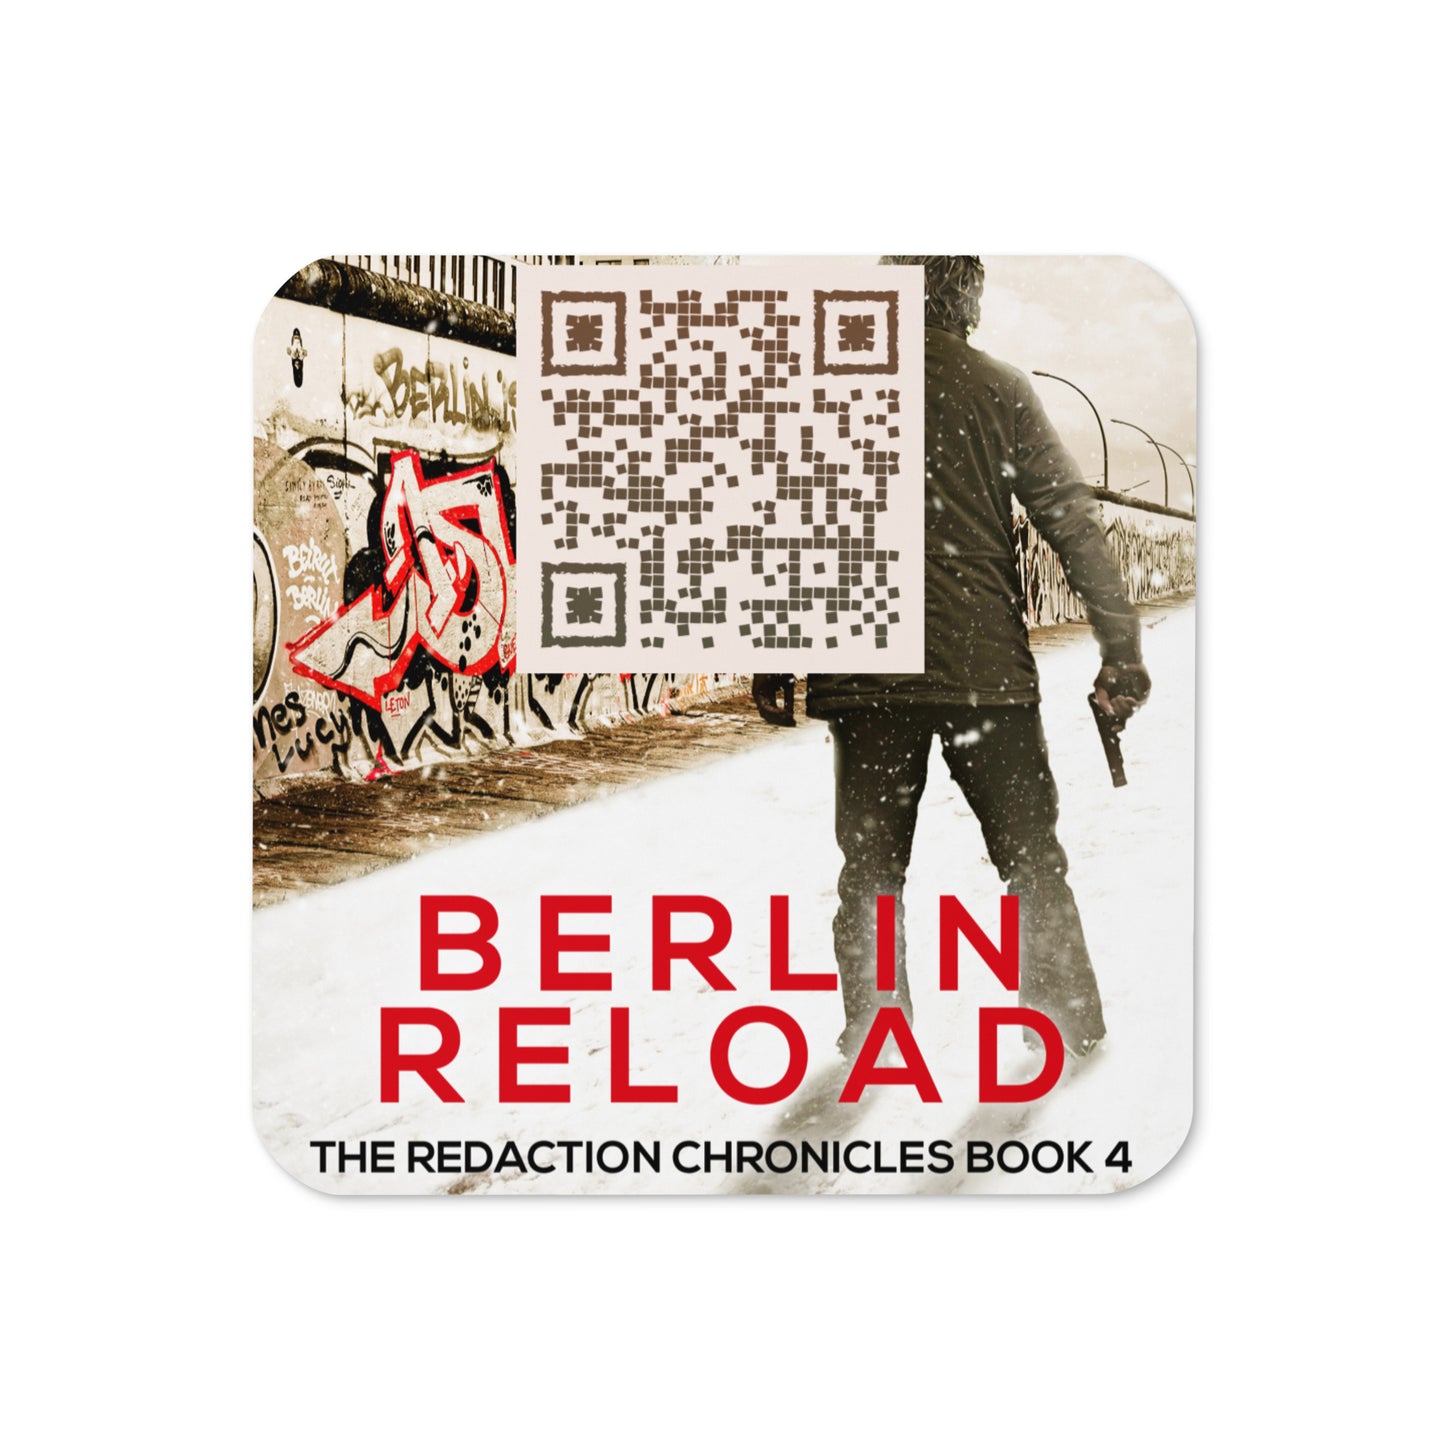 coaster with cover art from James Quinn's book Berlin Reload